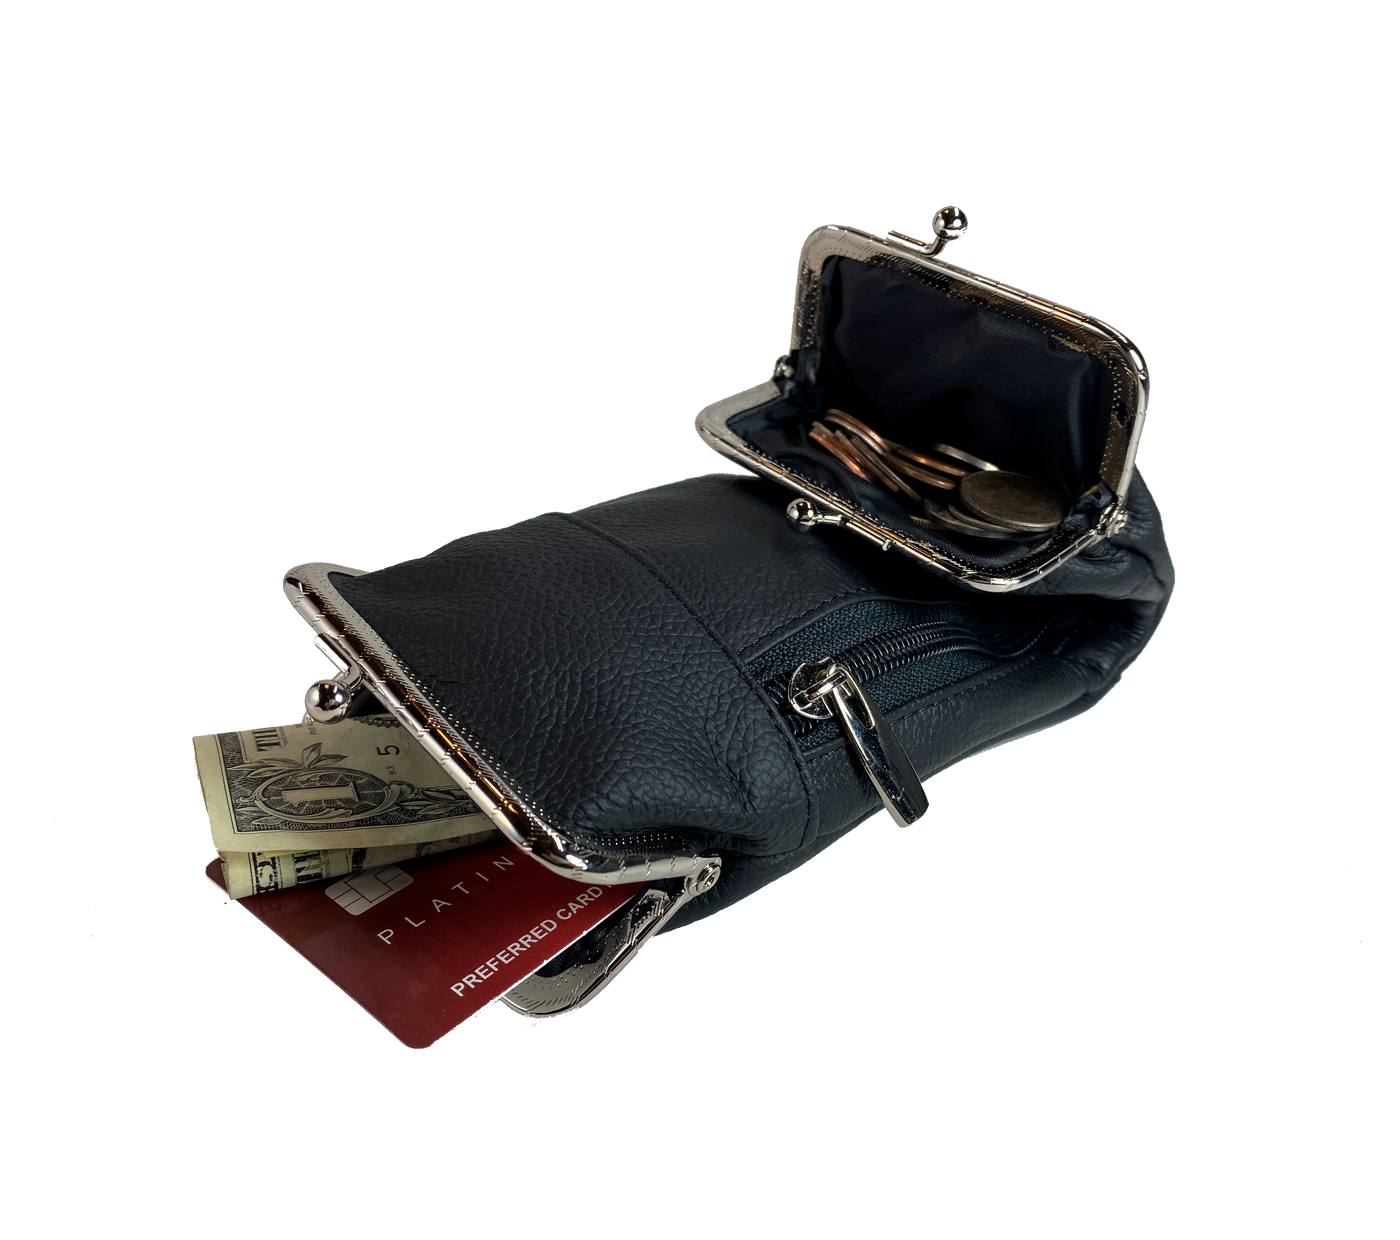 This is a versatile case, it has 2 pockets with clasp closures, plus a zippered hidden pocket. Great for lots of stuff in a small compact case. Choose solid Black or Earth tones. Since we buy these assorted we will send whichever browns we have in stock. open view